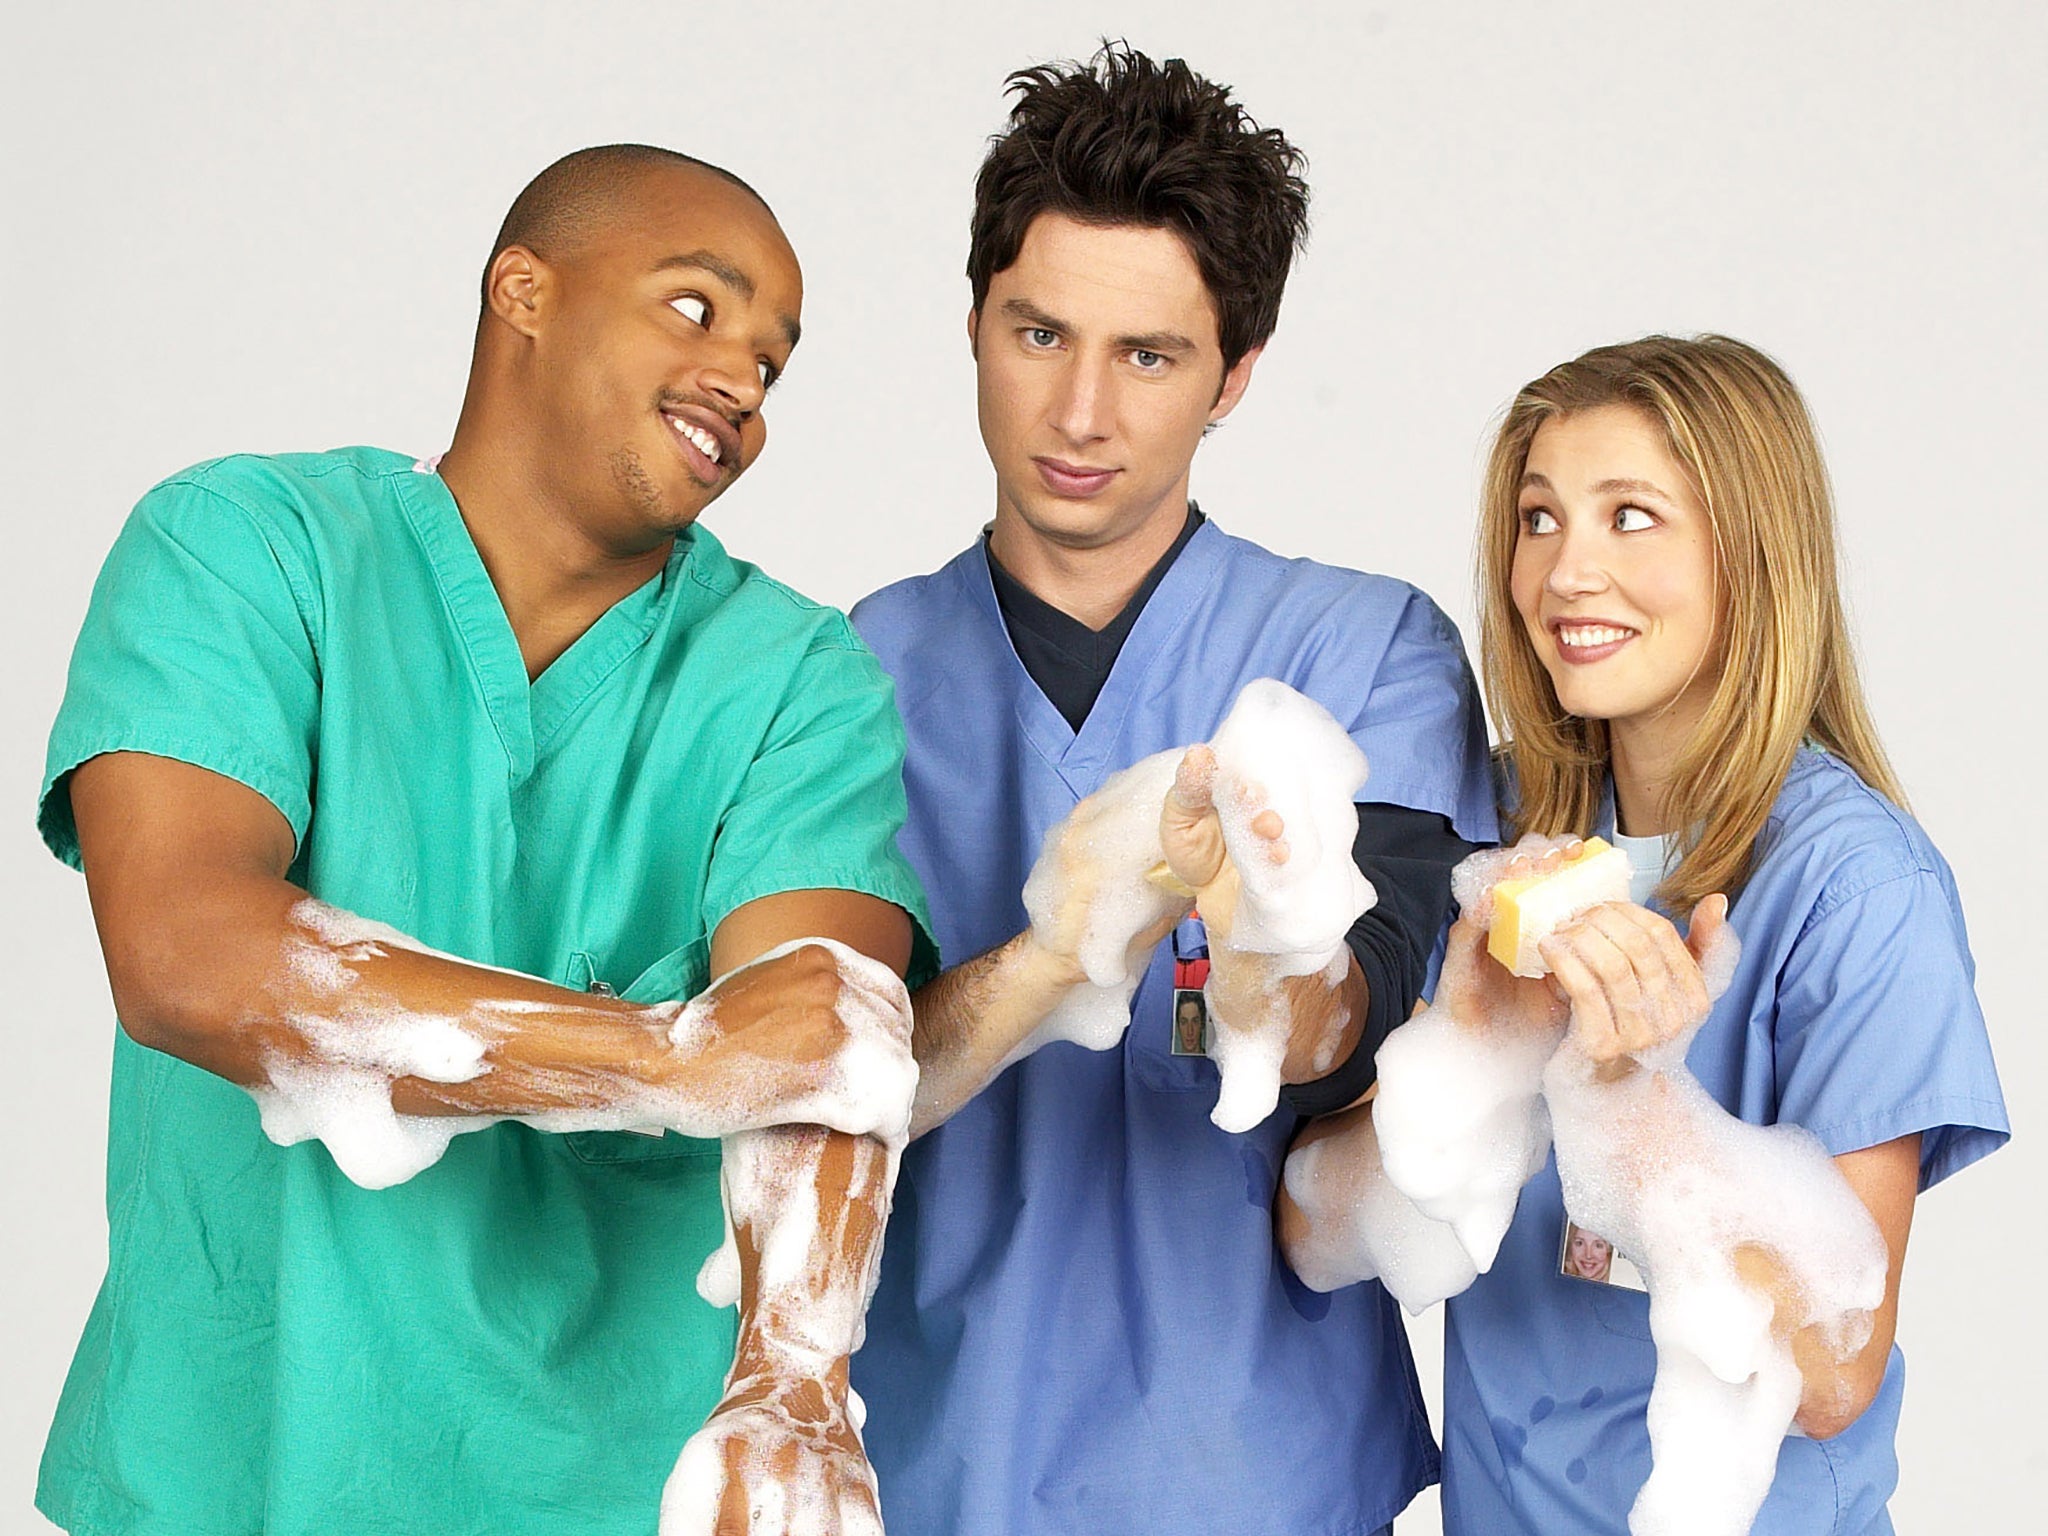 Which Scrubs Character Are You?